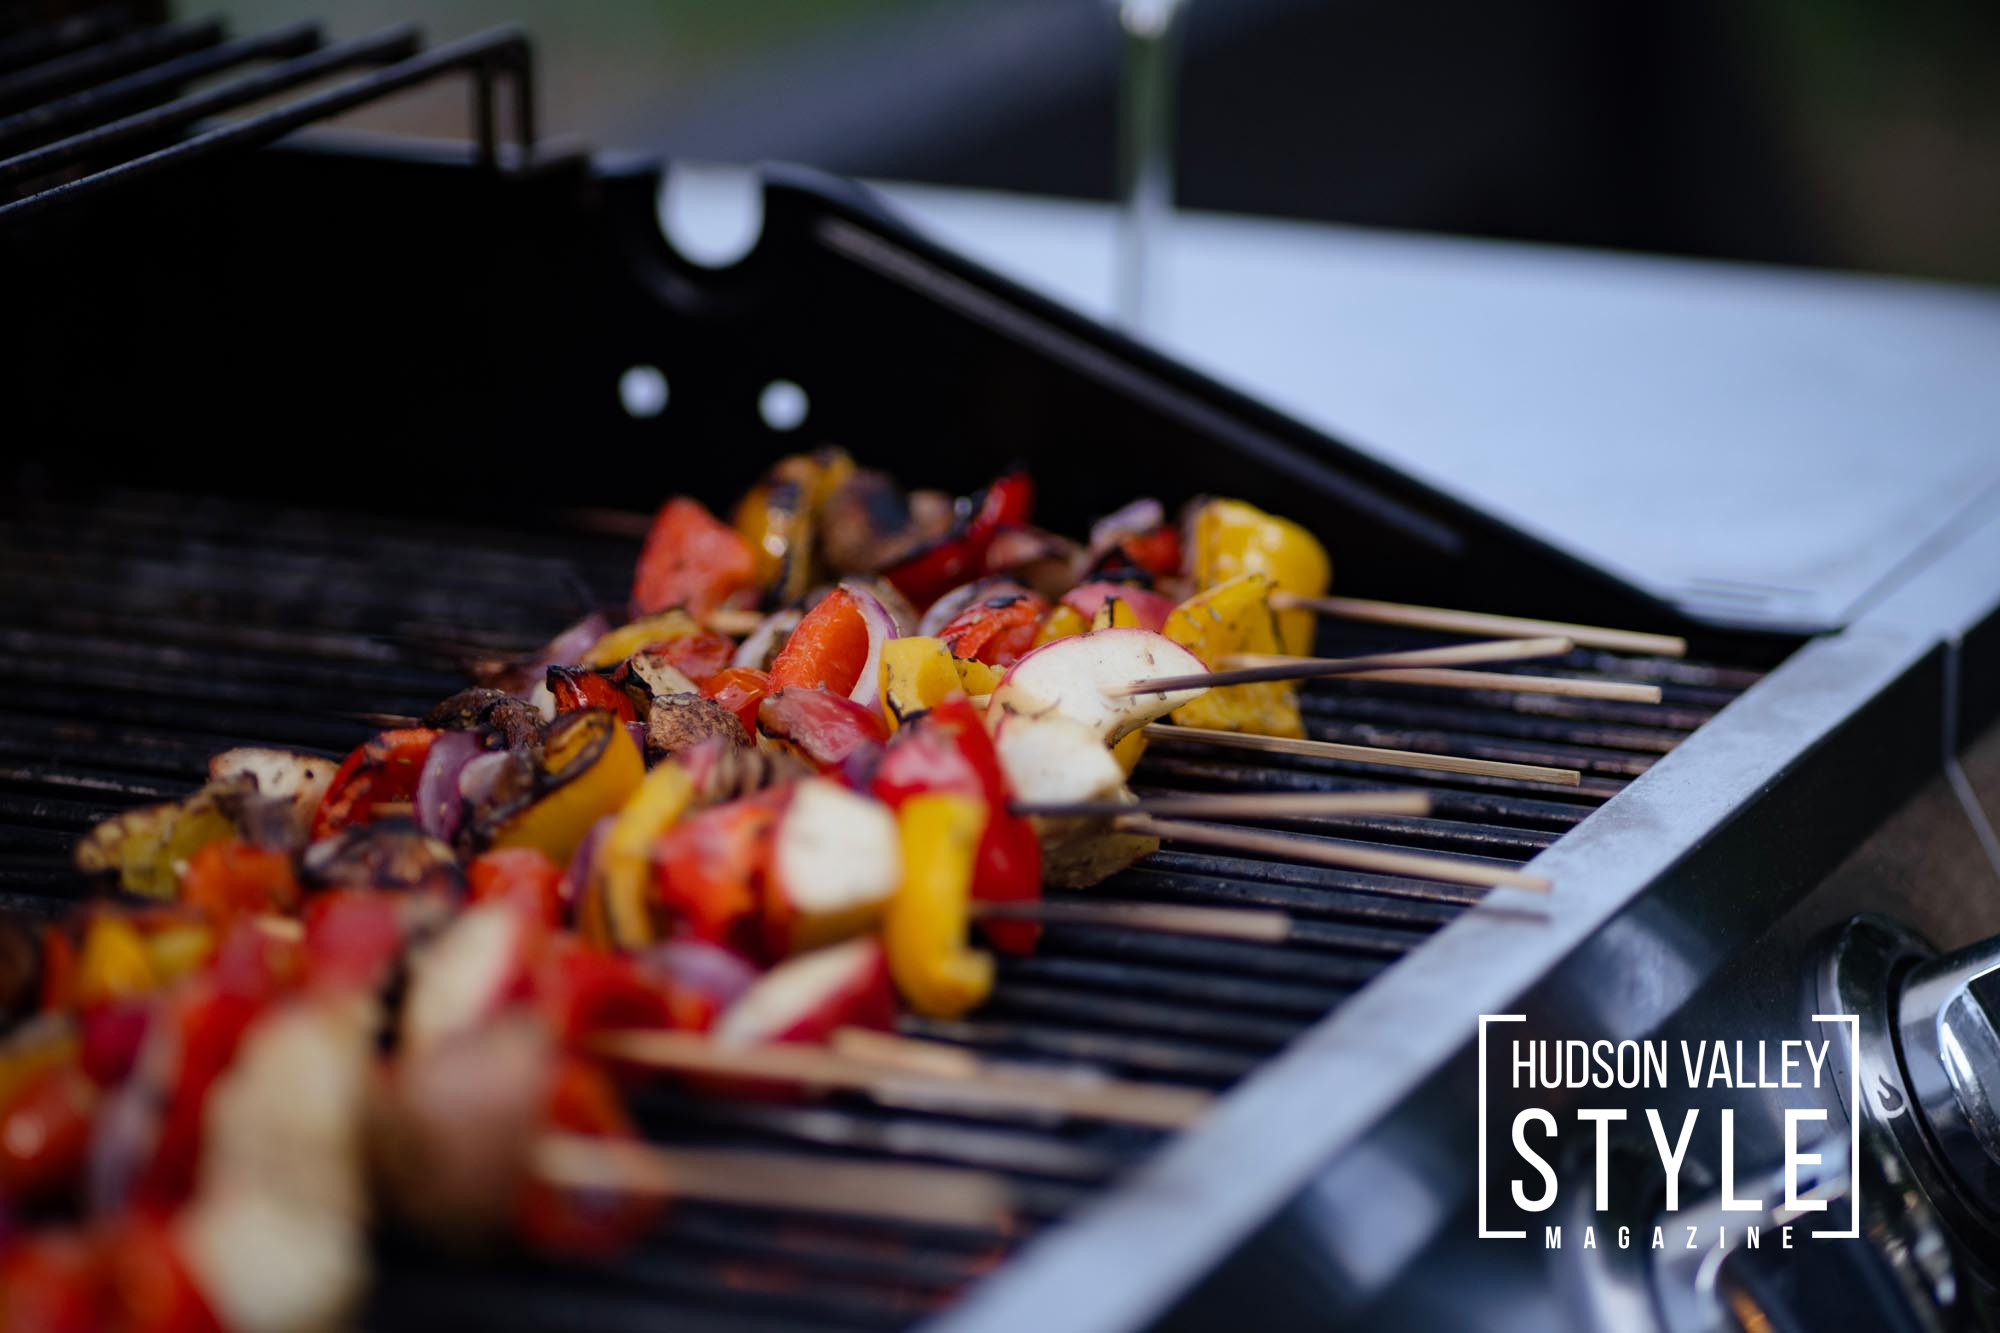 Sizzling Skewers & Scenic Views: A Catskill Mountains Hideaway Experience at Alluvion Vacations' Pond Life Farmhouse in Bloomville, NY – Vegan Grilling with Maxwell Alexander – Presented by Alluvion Vacations